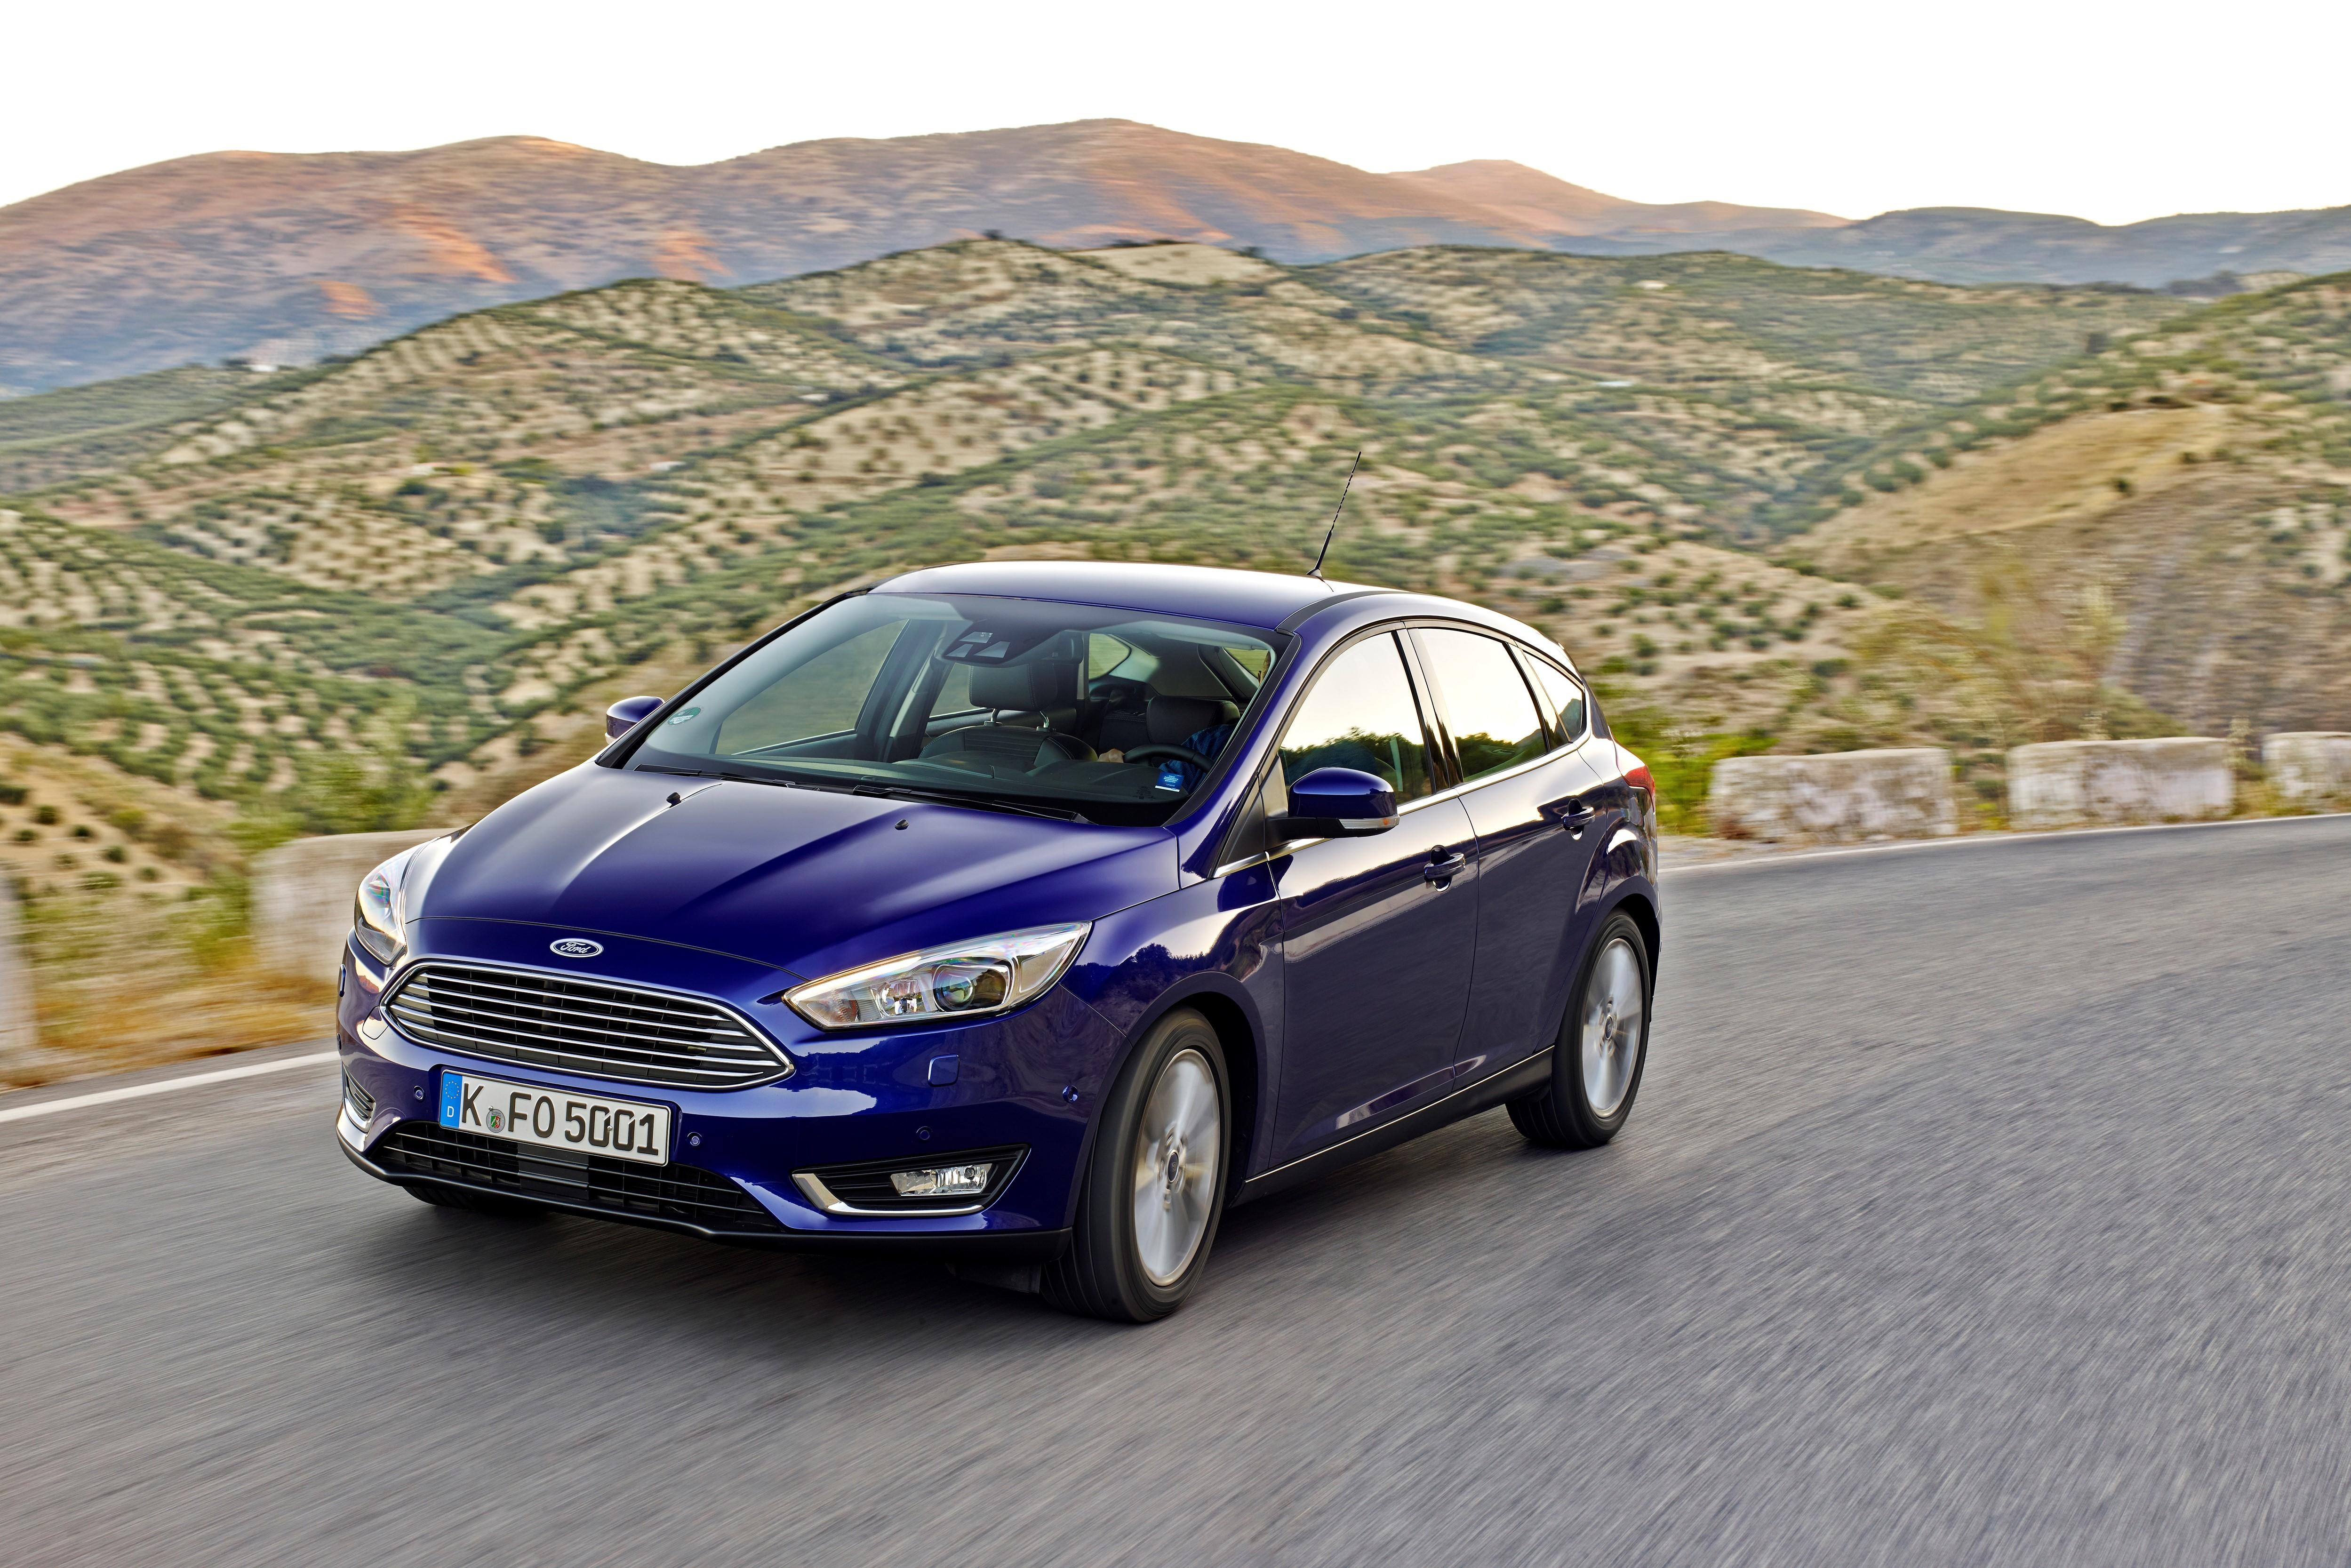 Ford Focus 2015. Форд фокус 3 2015. Форд фокус 3 2014. Форд фокус 4 2014.